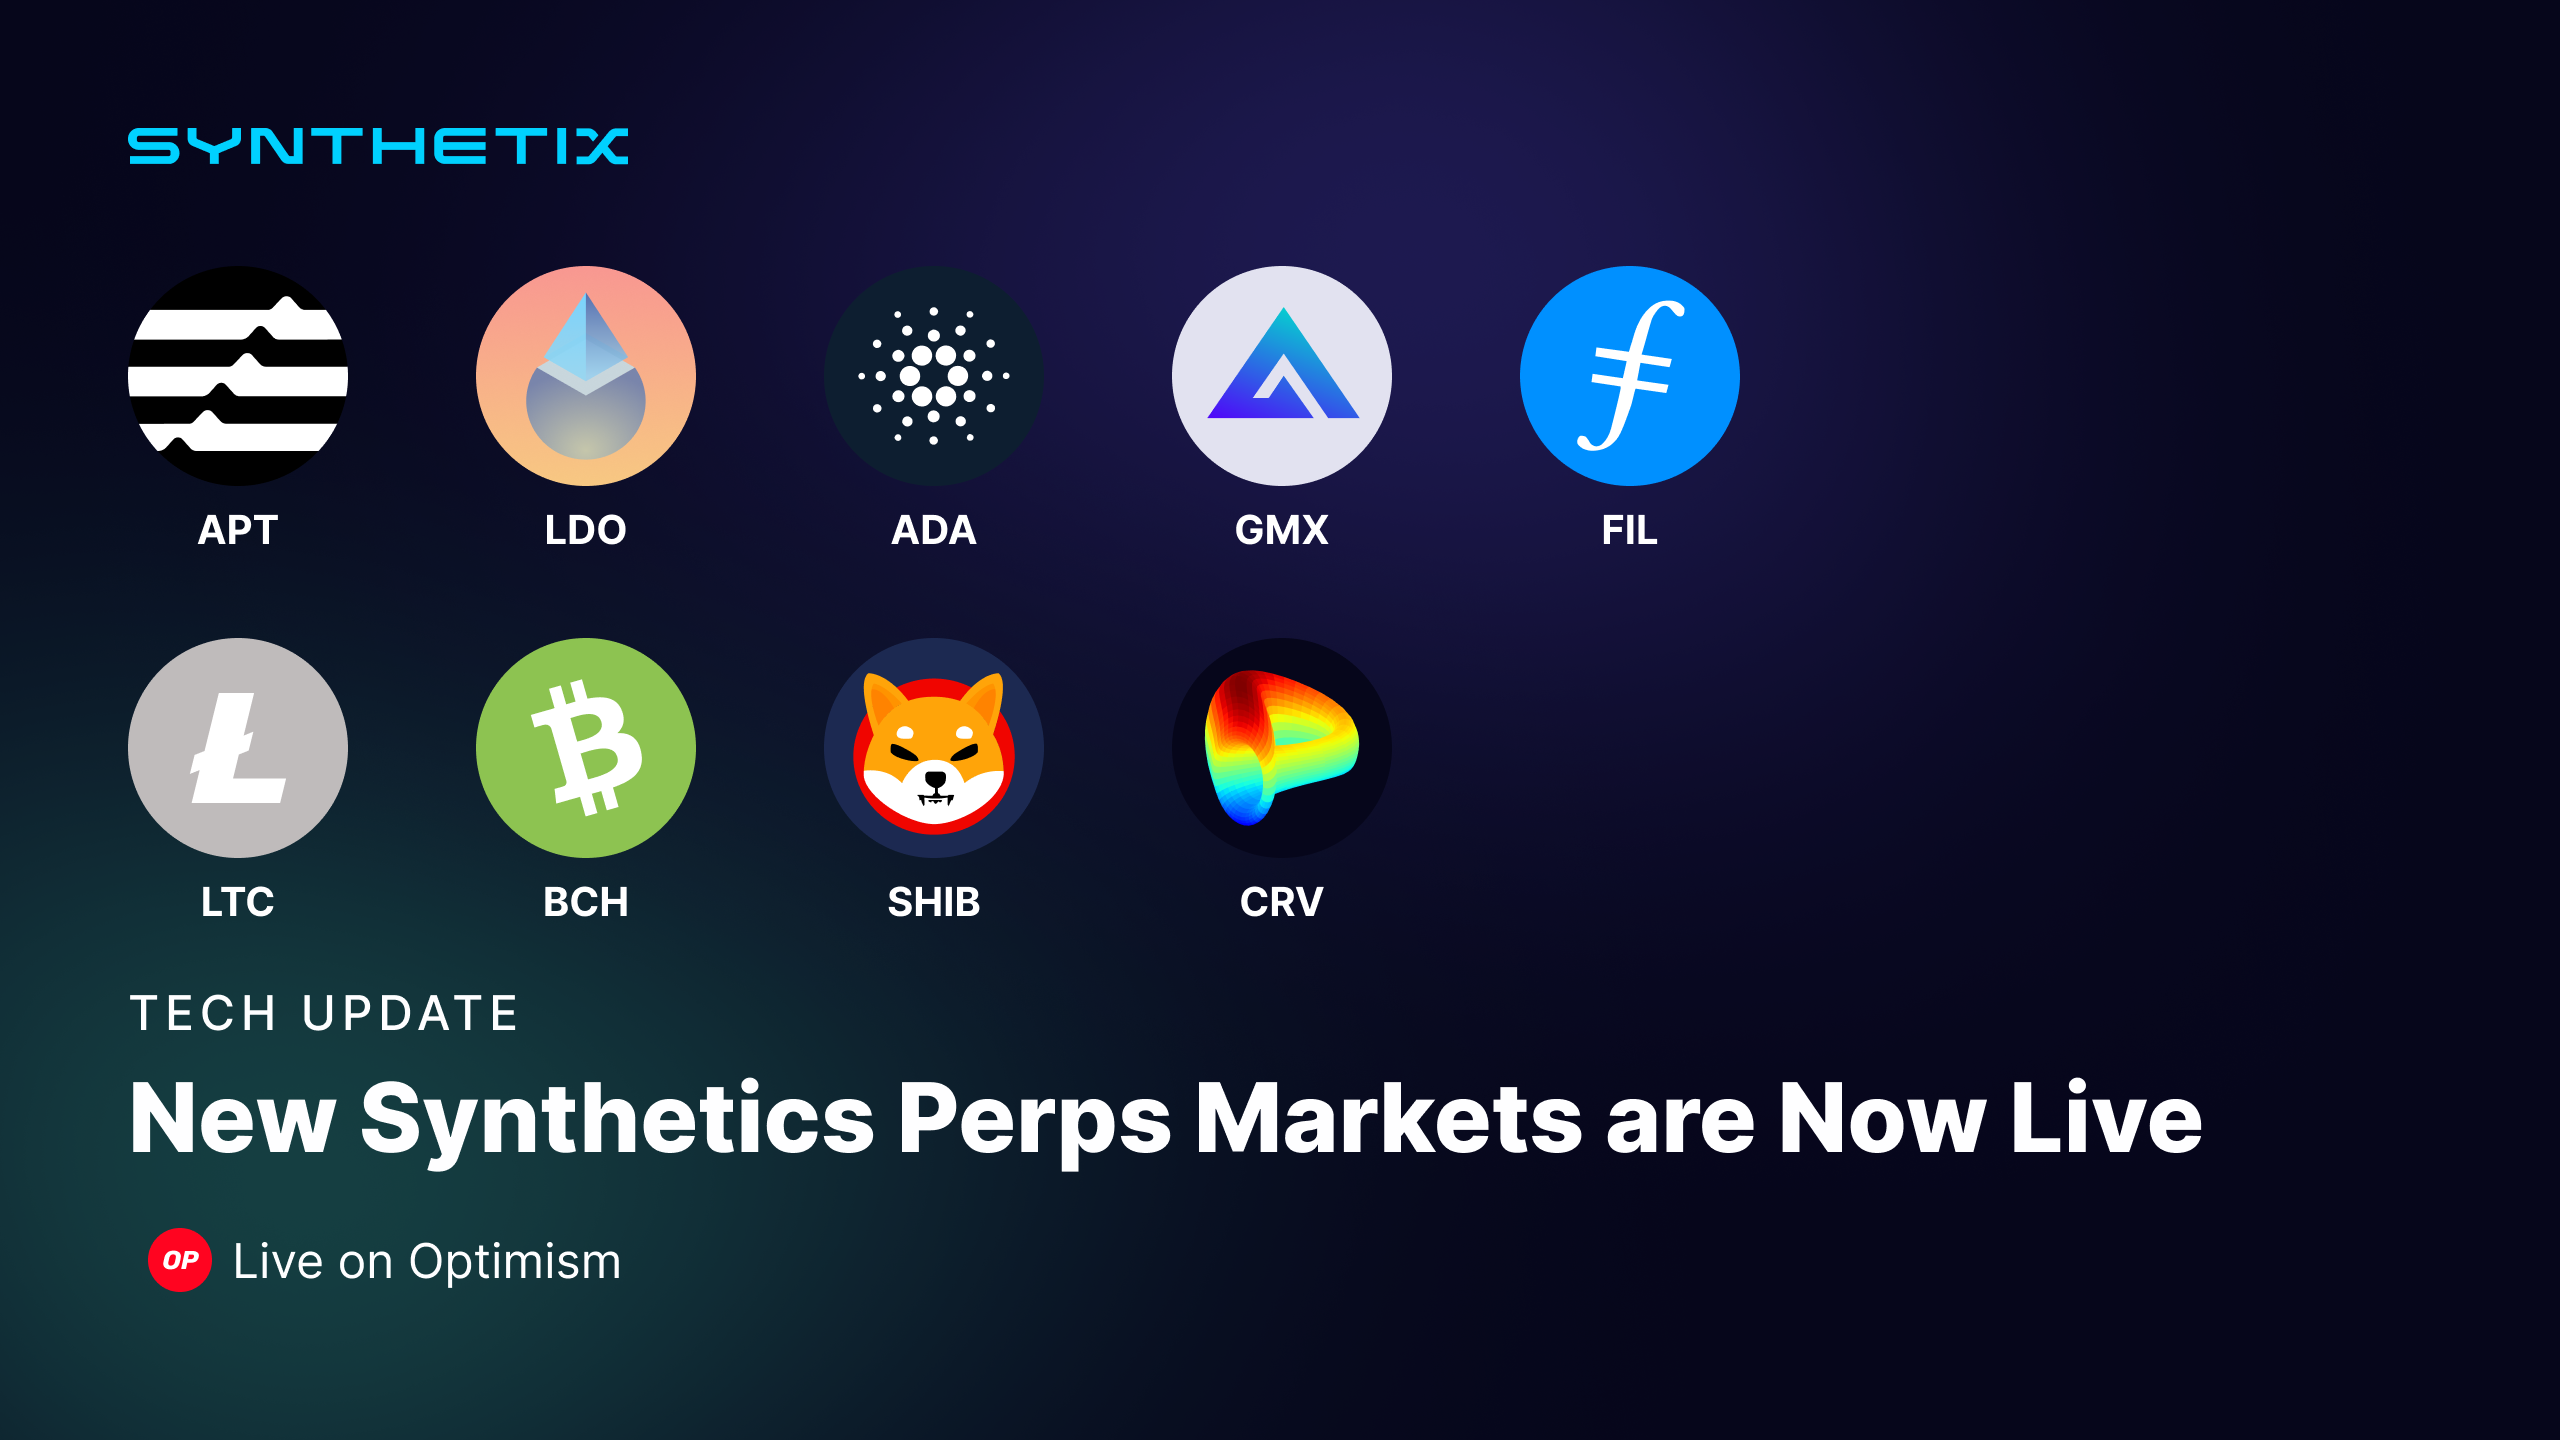 Nine New Synthetix Perps Markets are now live